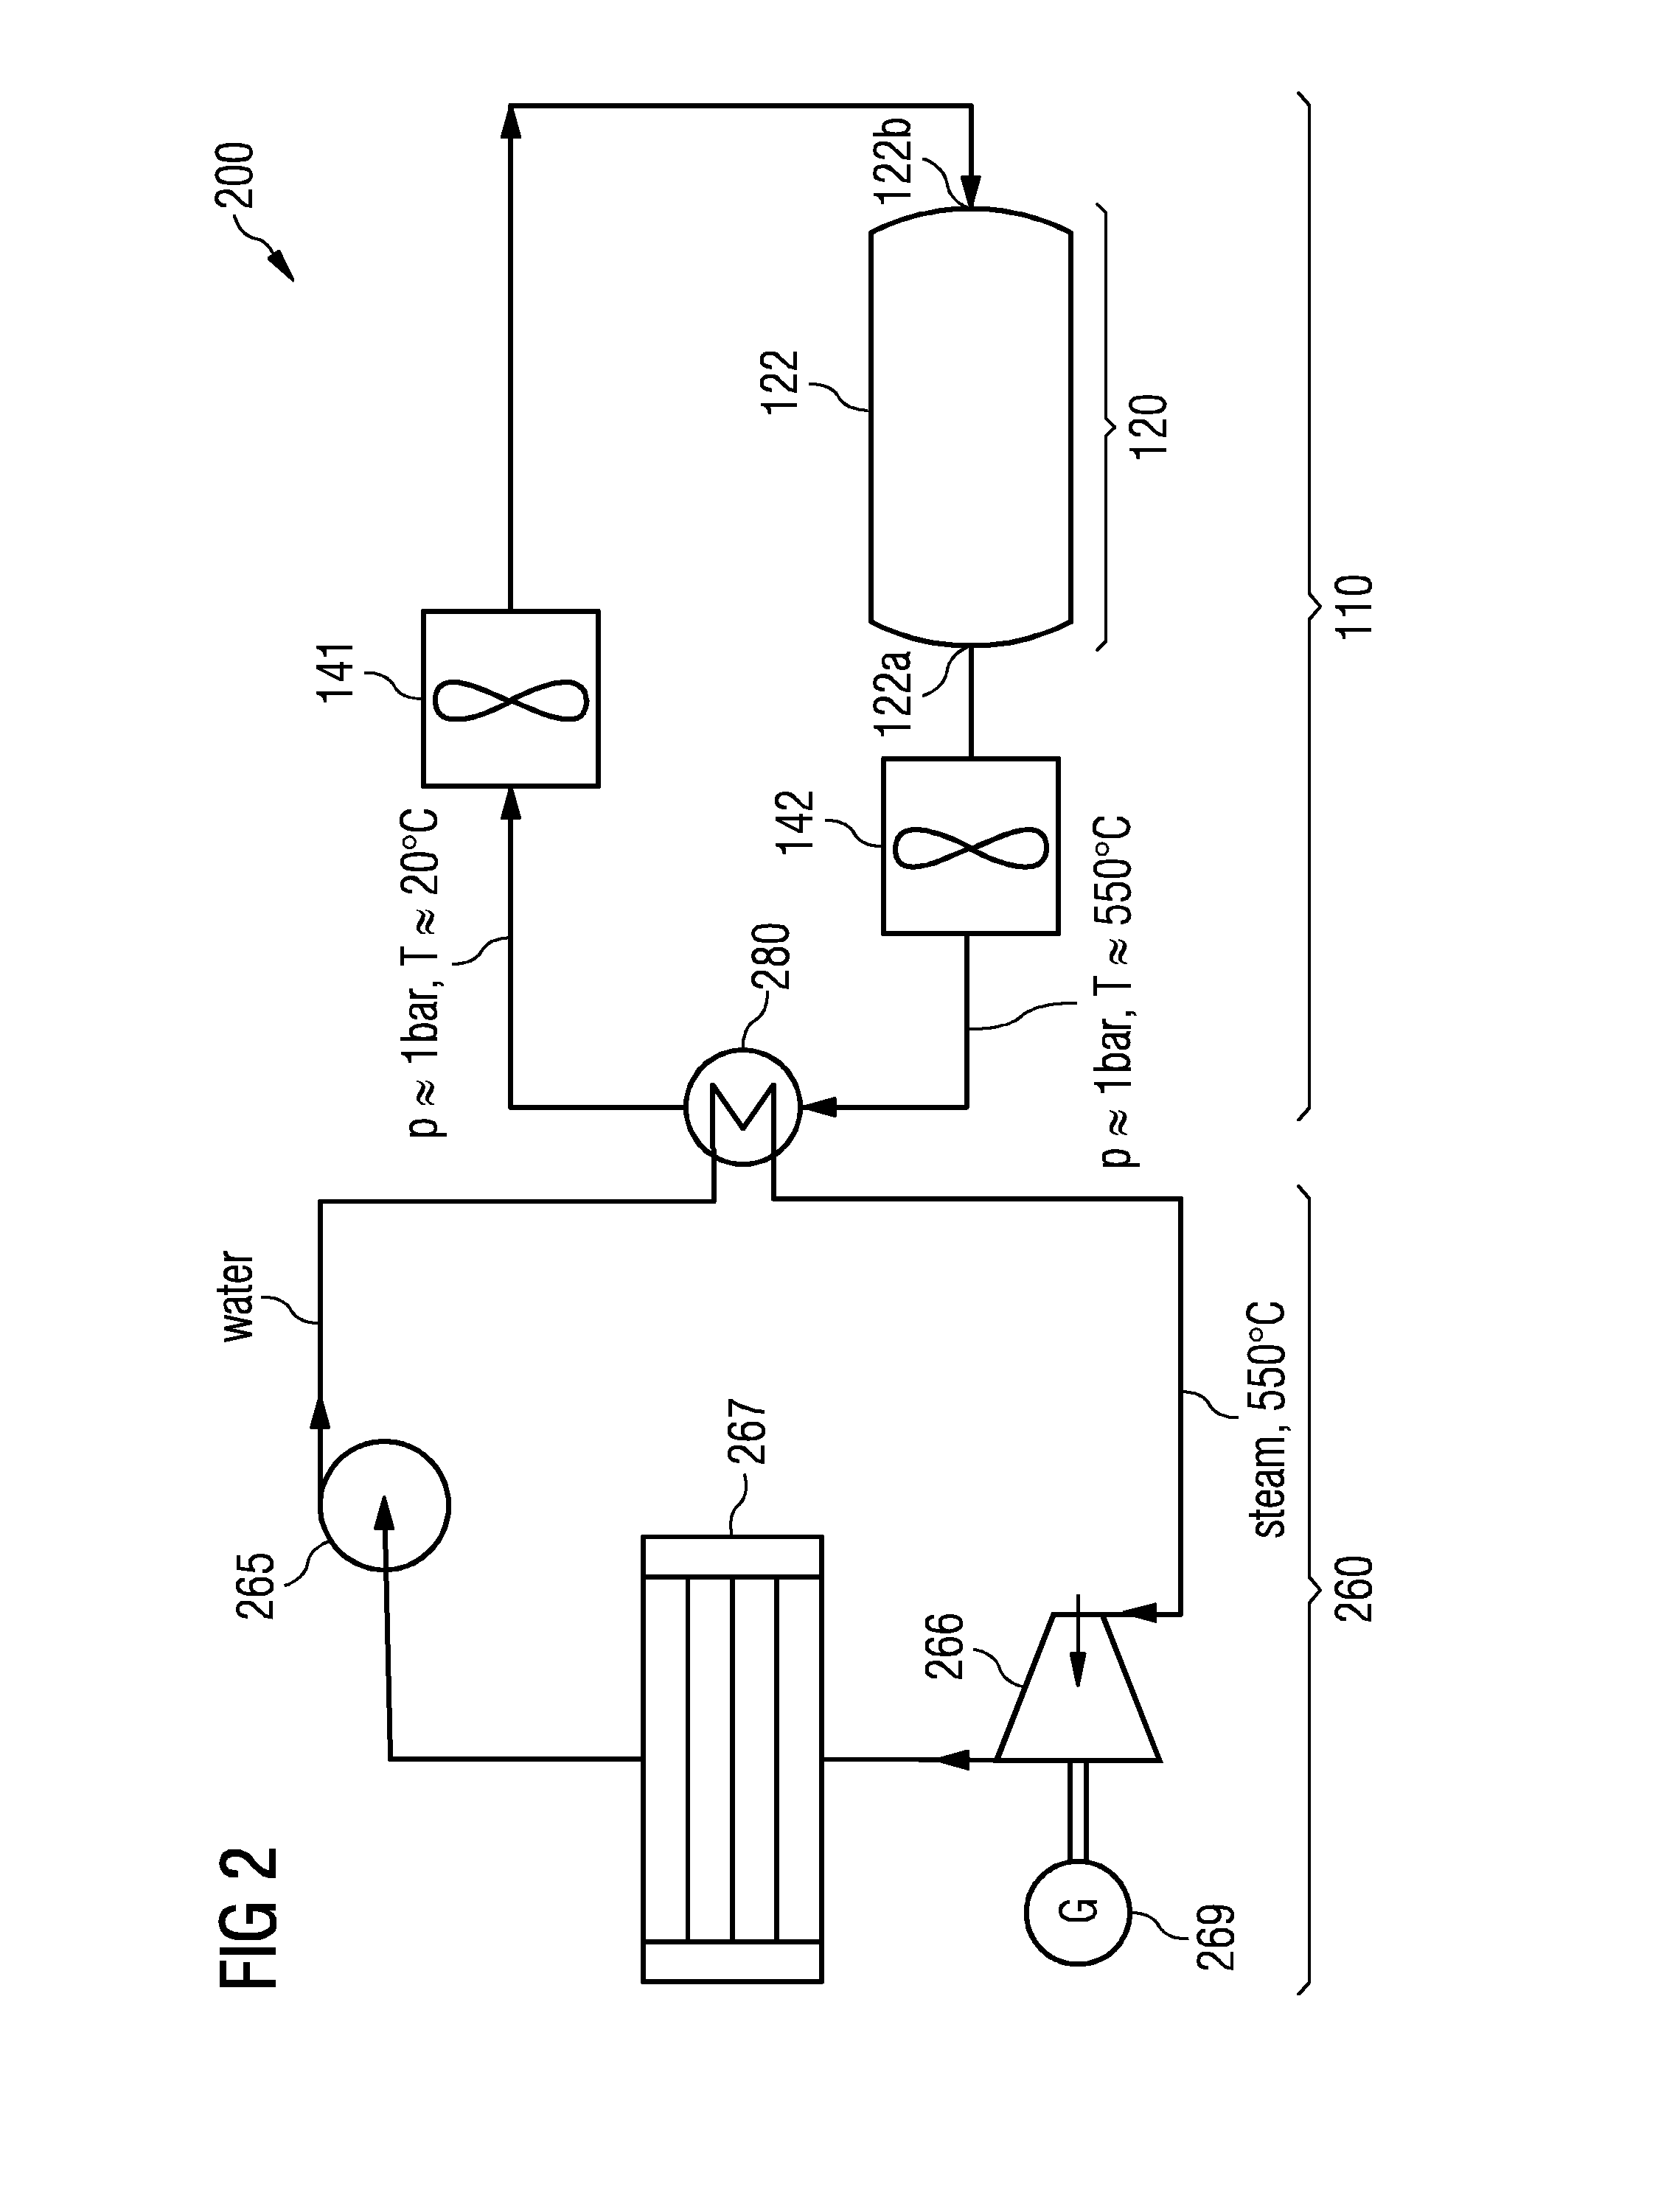 Thermal energy storage and recovery system comprising a storage arrangement and a charging/discharging arrangement being connected via a heat exchanger